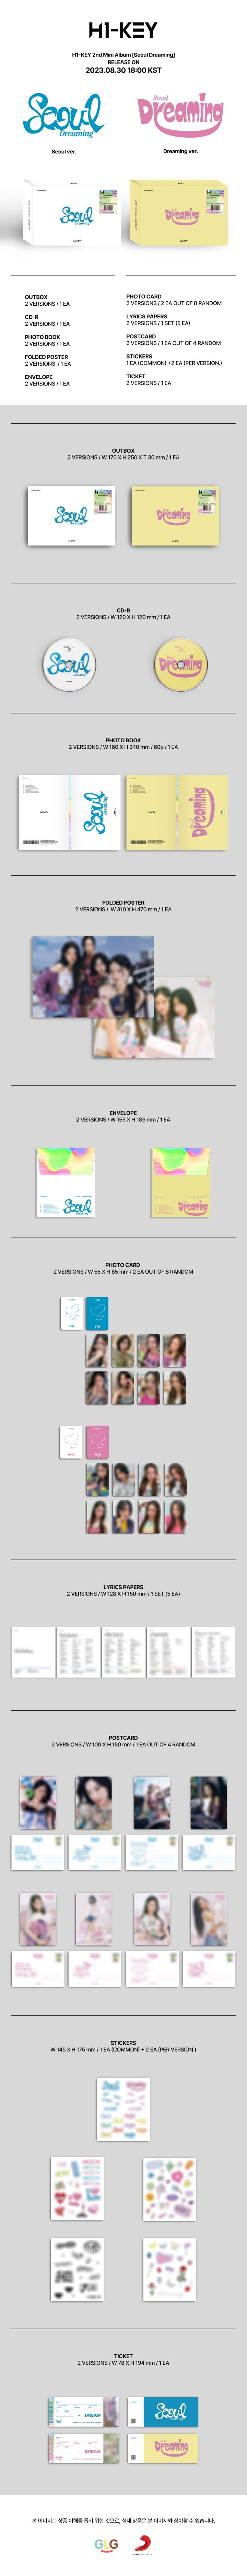 1 CD
1 Photo Book
1 Folded Poster
1 Envelope
2 Photo Cards (random out of 8 types)
5 Lyrics Papers
1 Postcard (random out ...